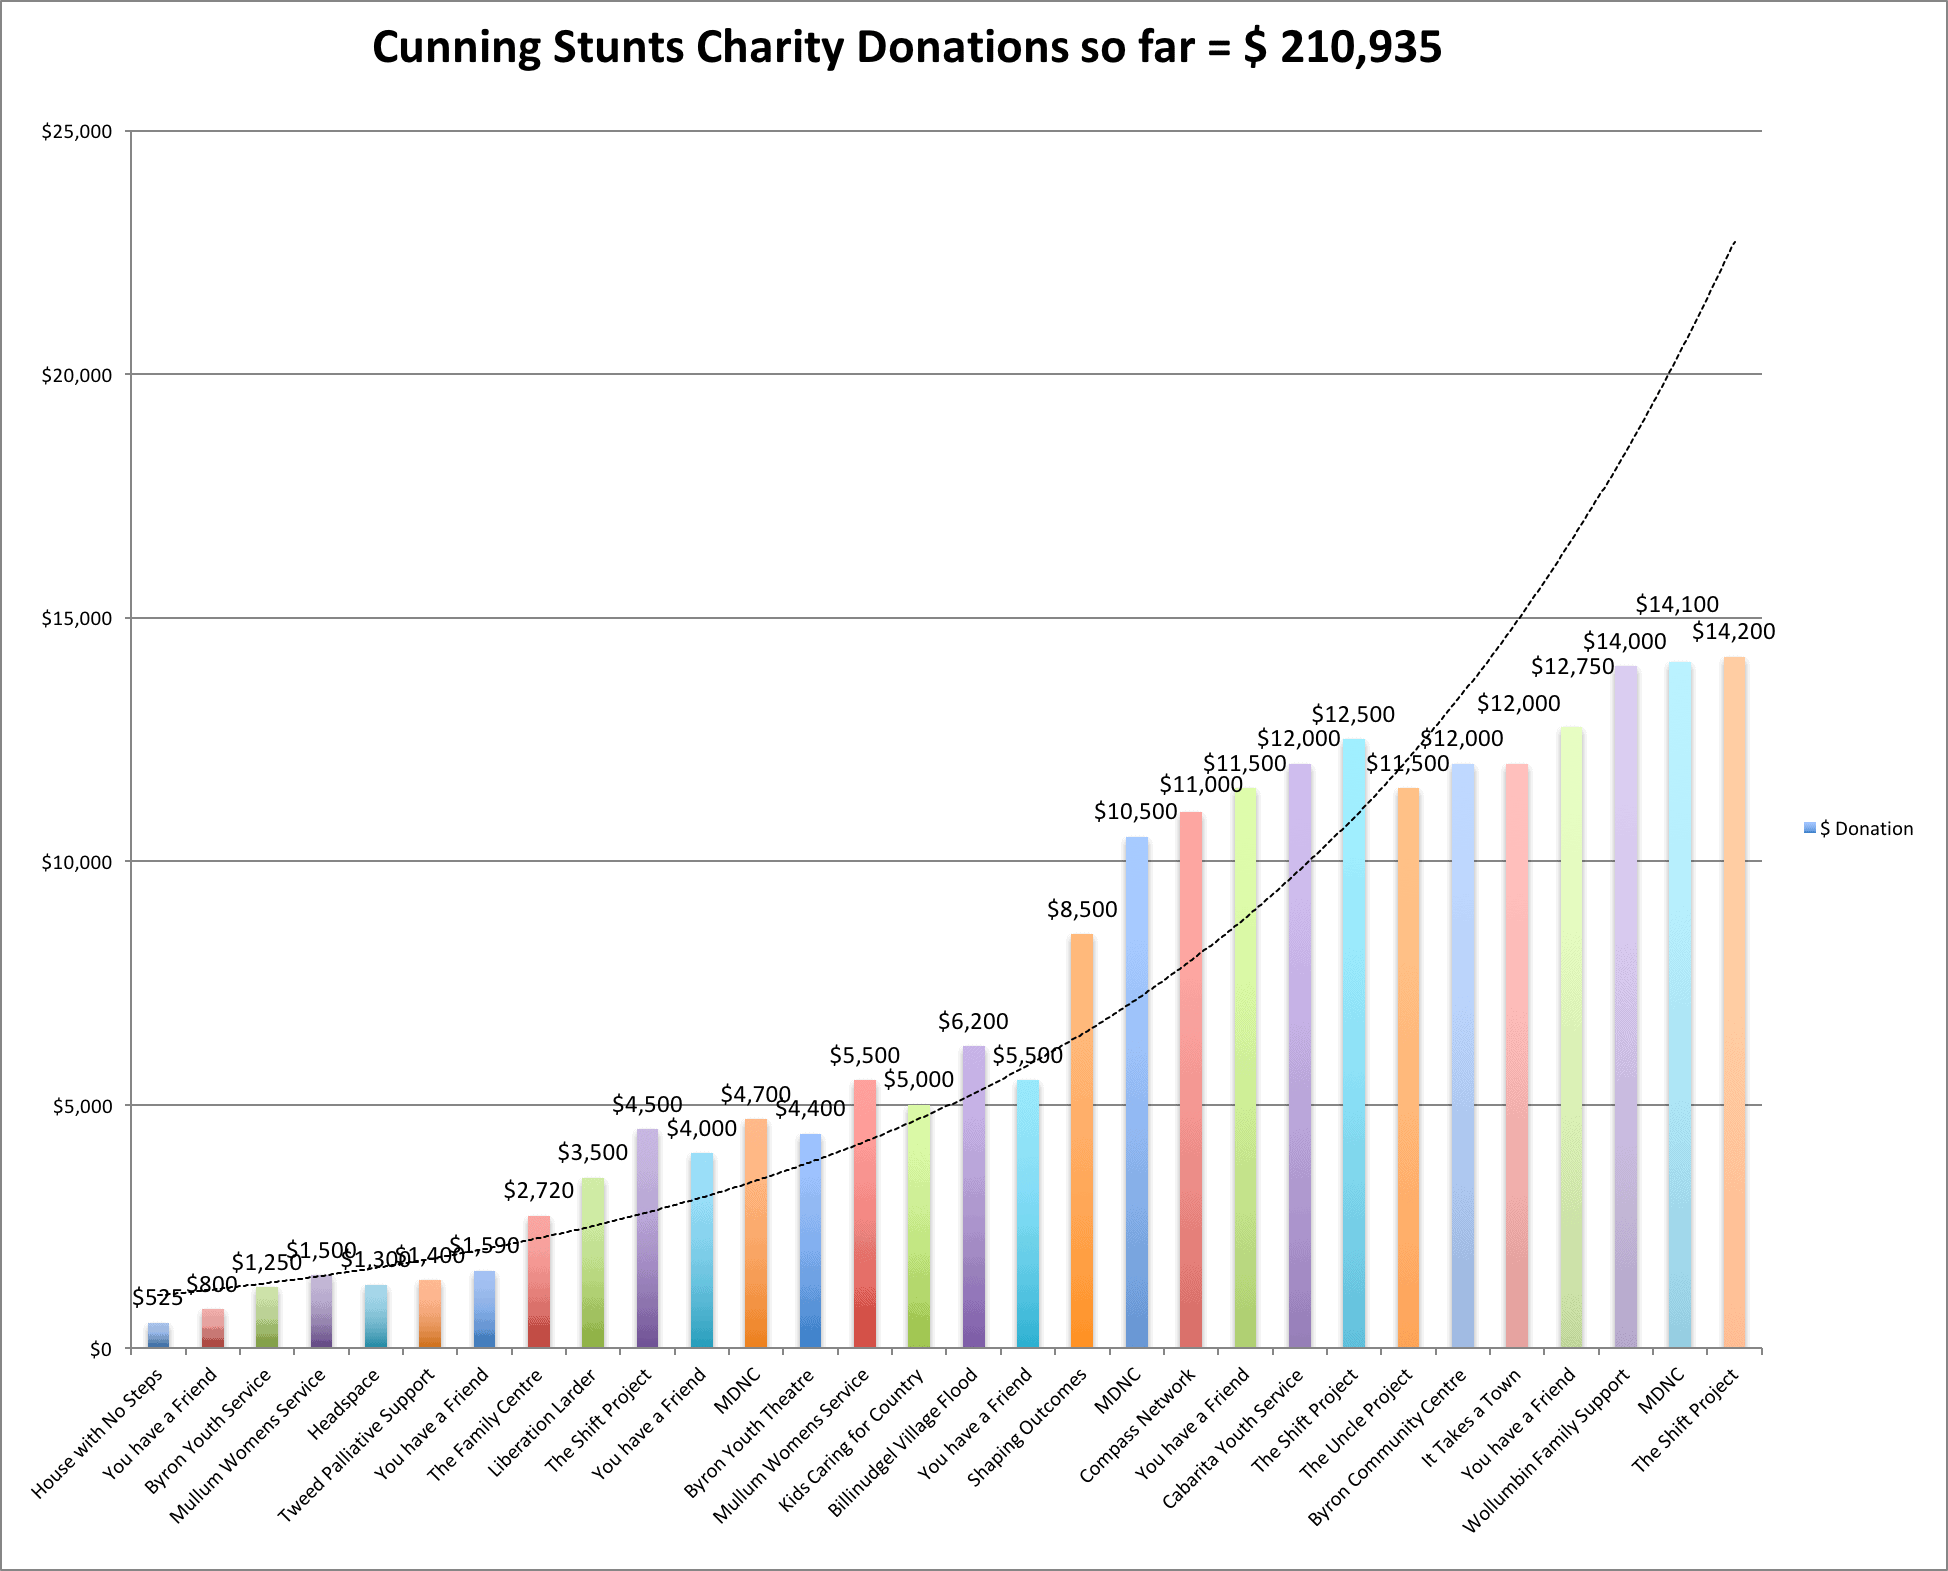 Donations to date